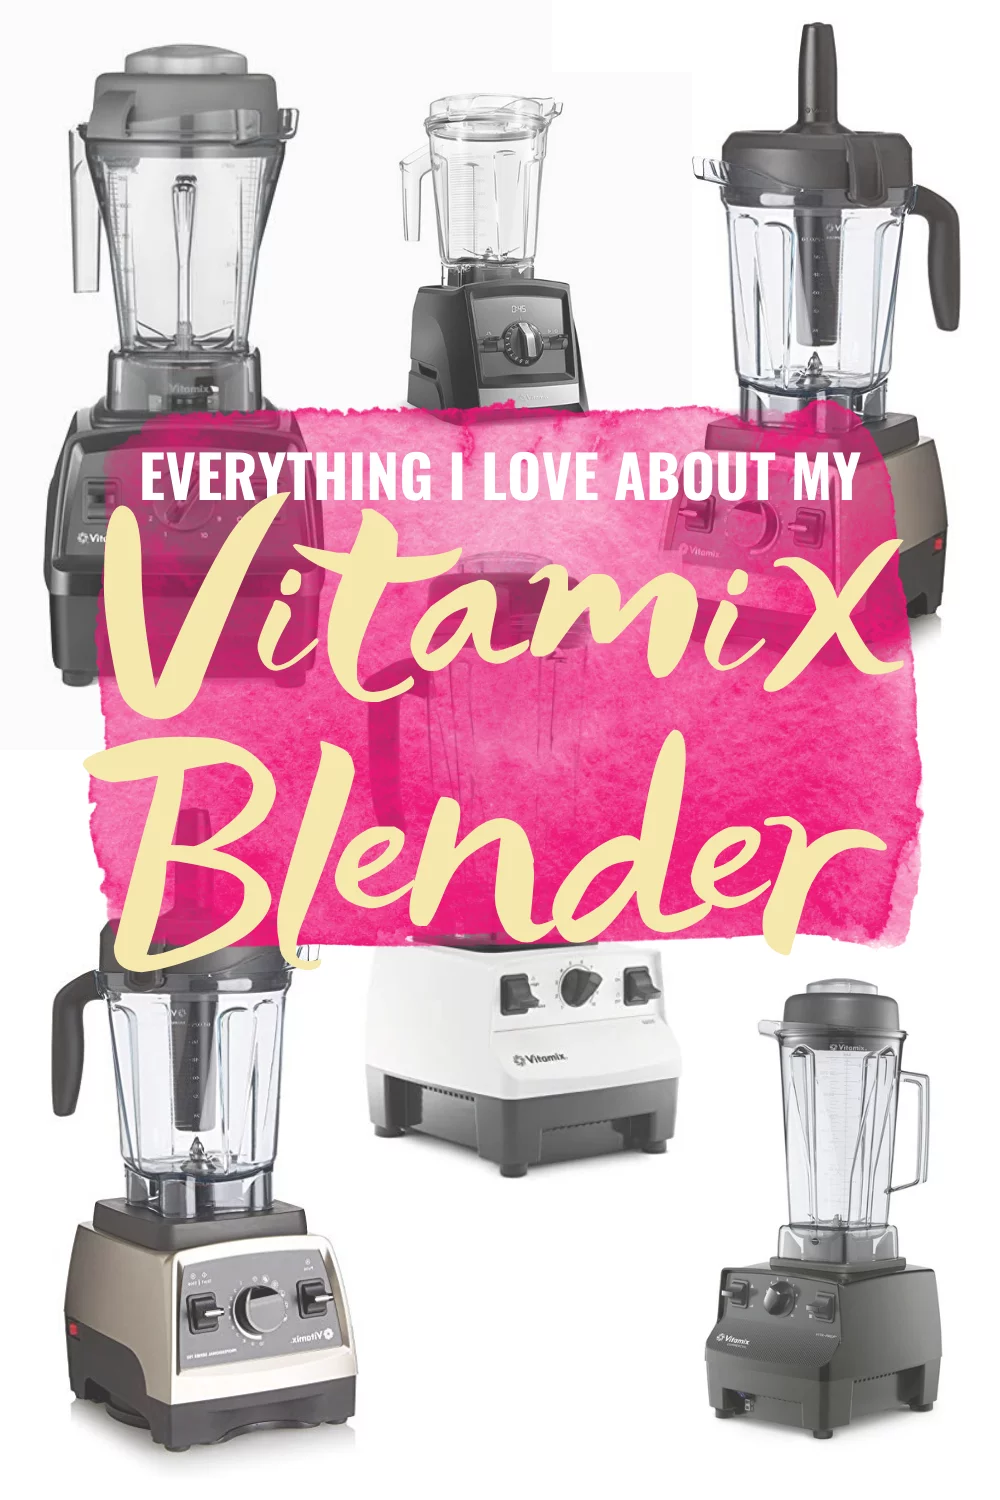 Everything I Love About My Vitamix Blender